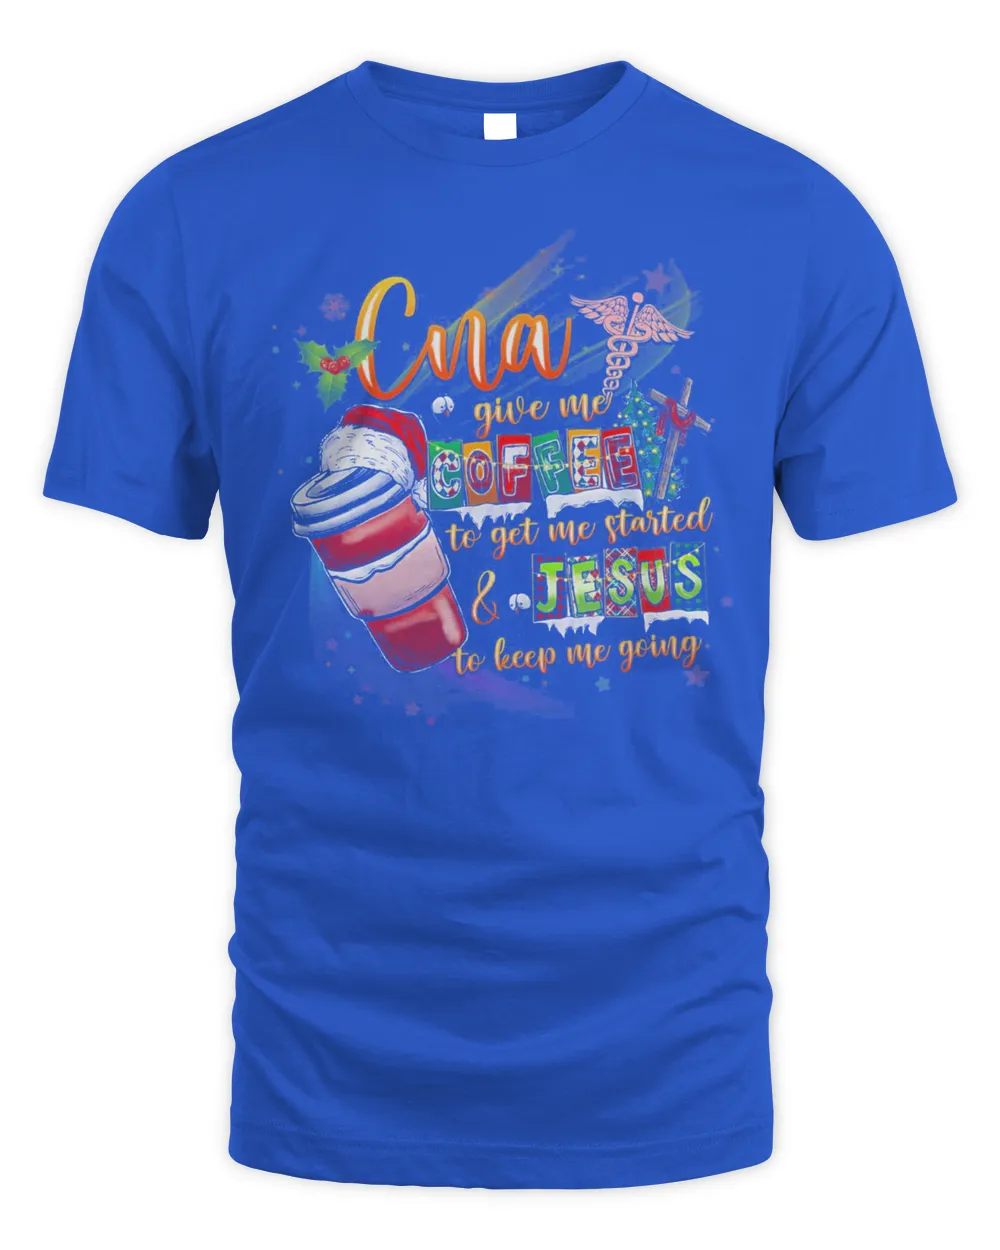 CNA Give My To Get The Me Started And Jesus To Keep Me Going Merry Christmas Shirt